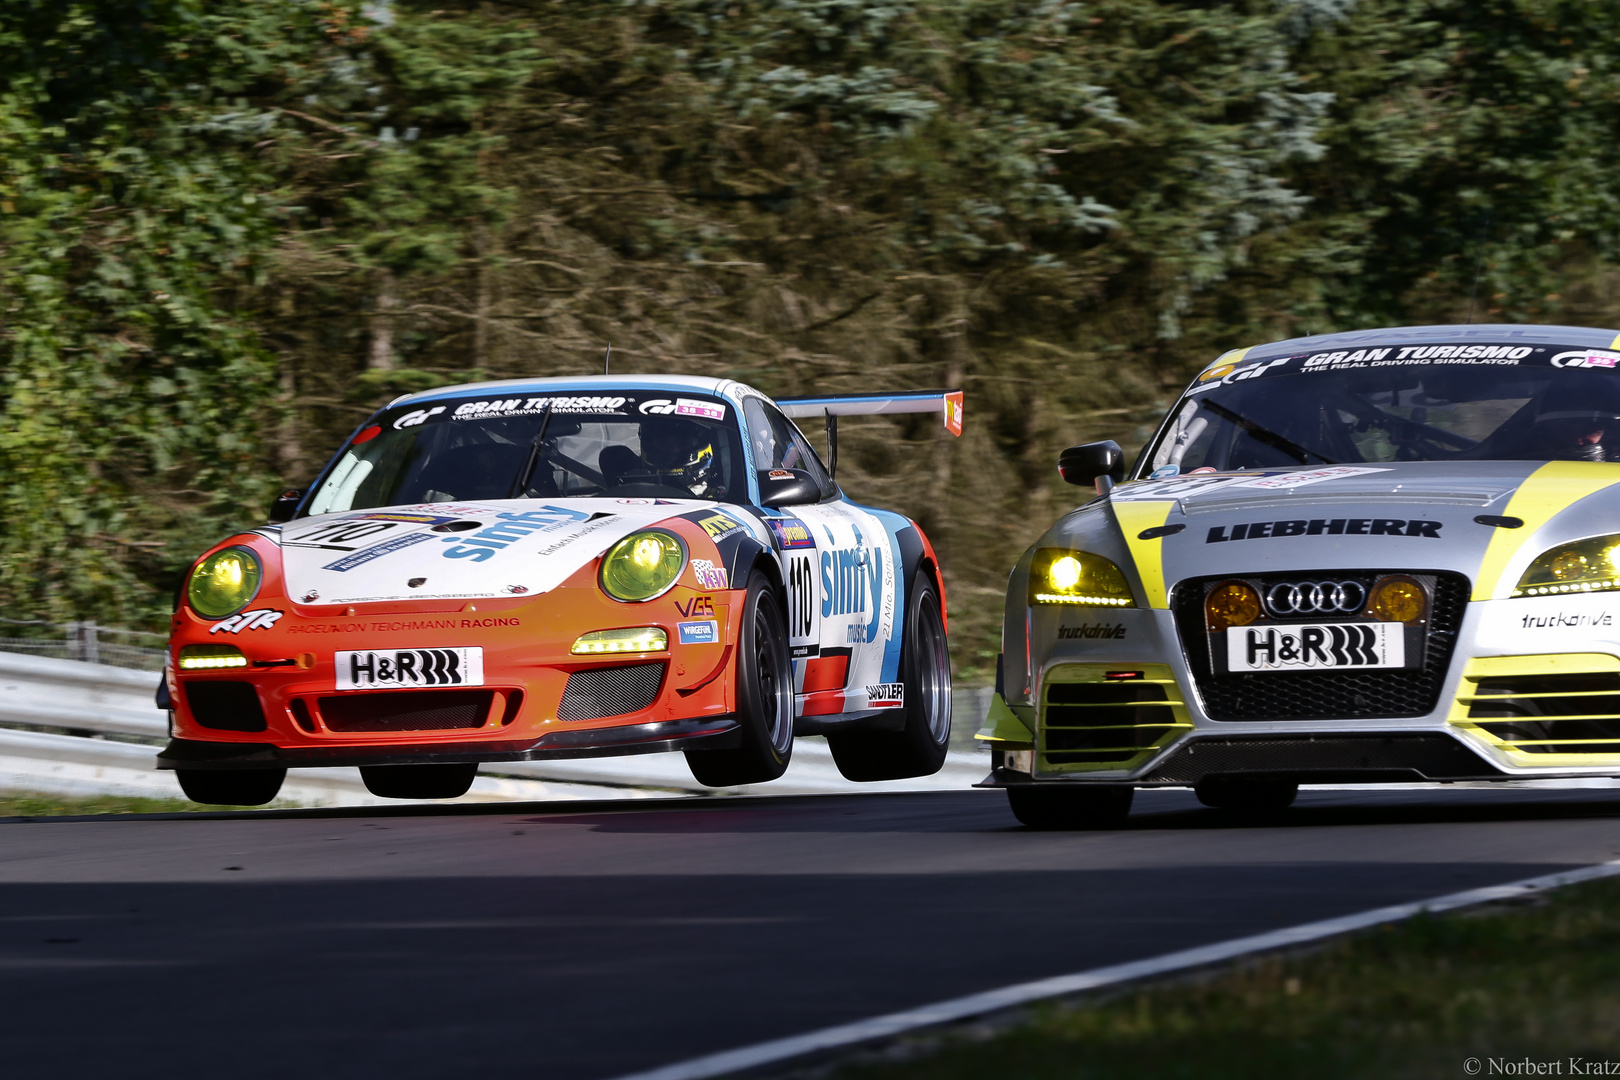 Nordschleife, lesson33 : if there is no space for overtaking, simply fly past....